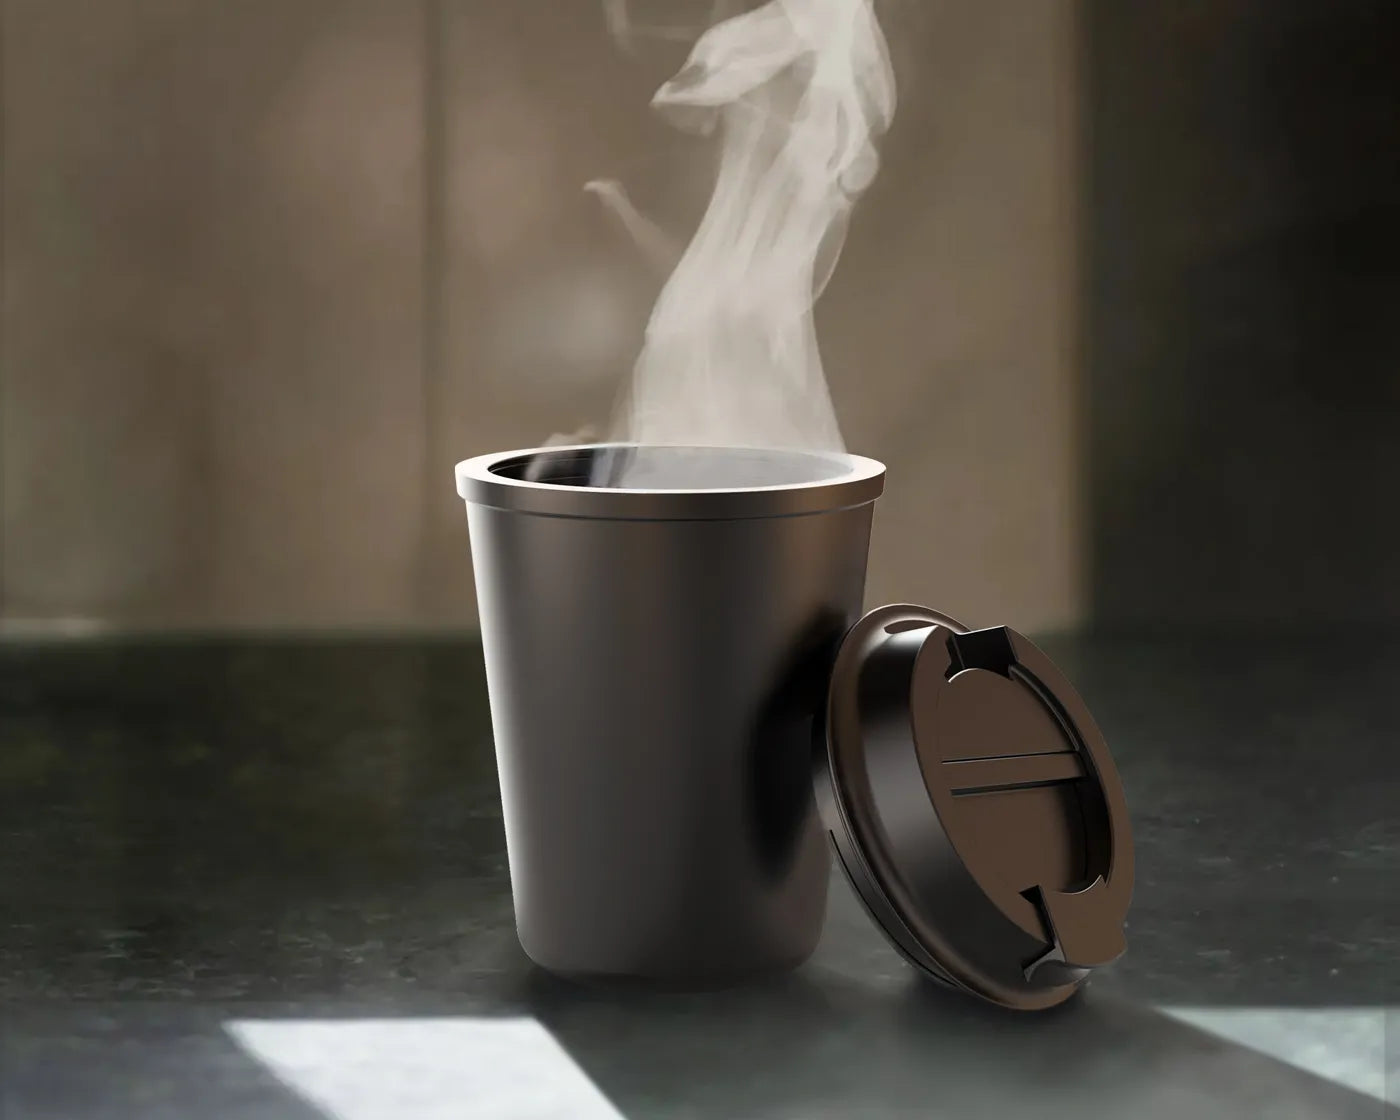 Steaming hot beverage in an open matte black travel mug on kitchen counter for morning coffee.